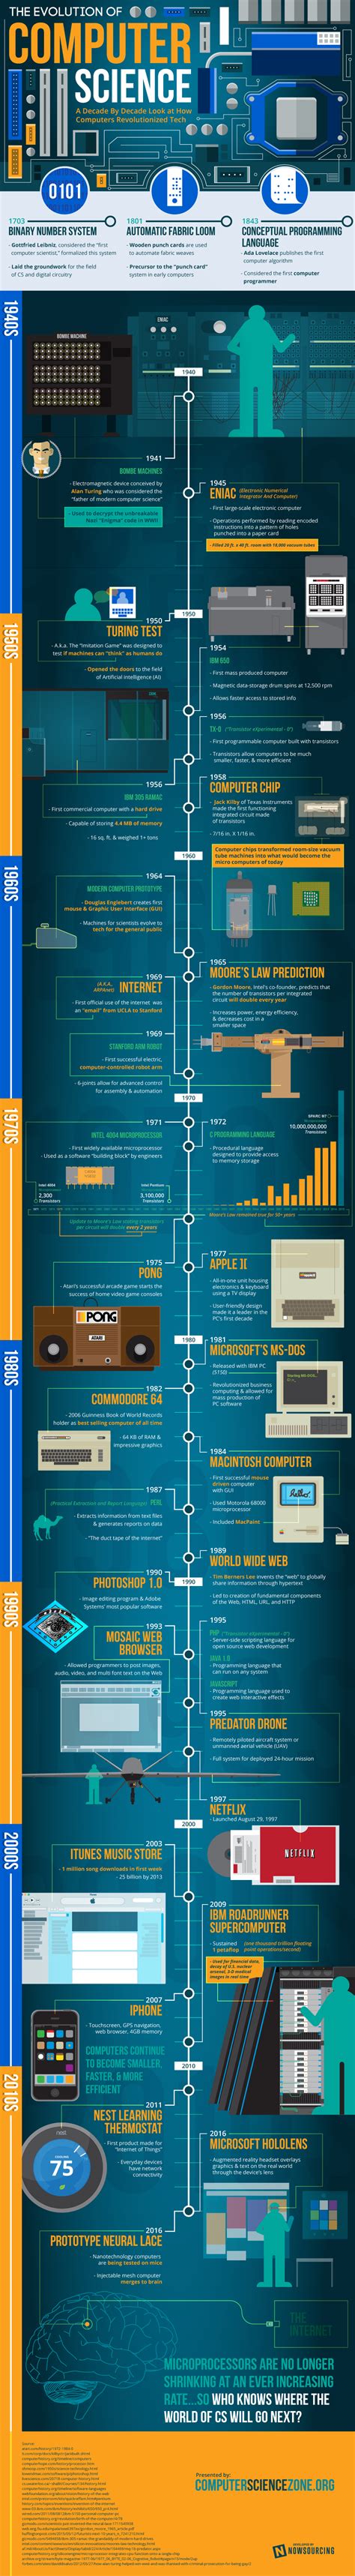 Digital Evolution How Computers Have Changed The World